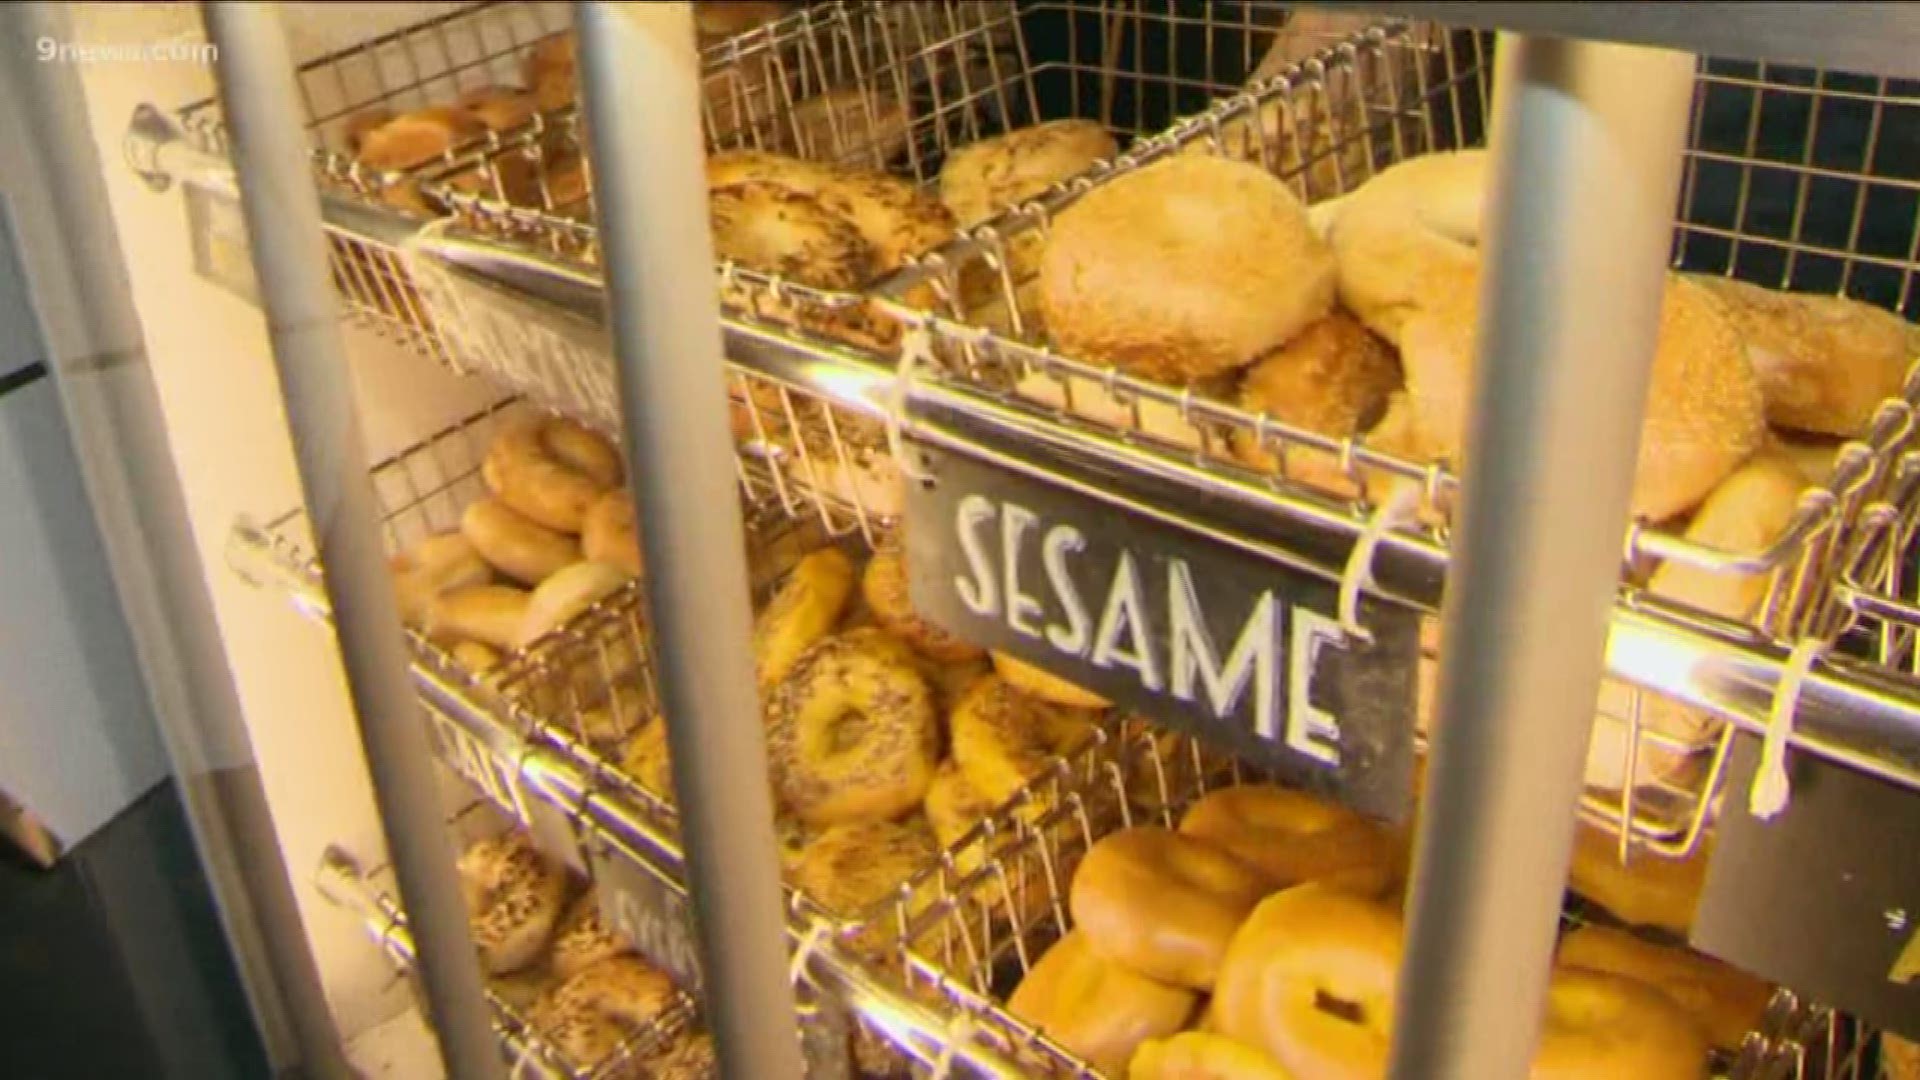 The owner spent years creating water just like the water found in New York to give bagels in Colorado that same taste.